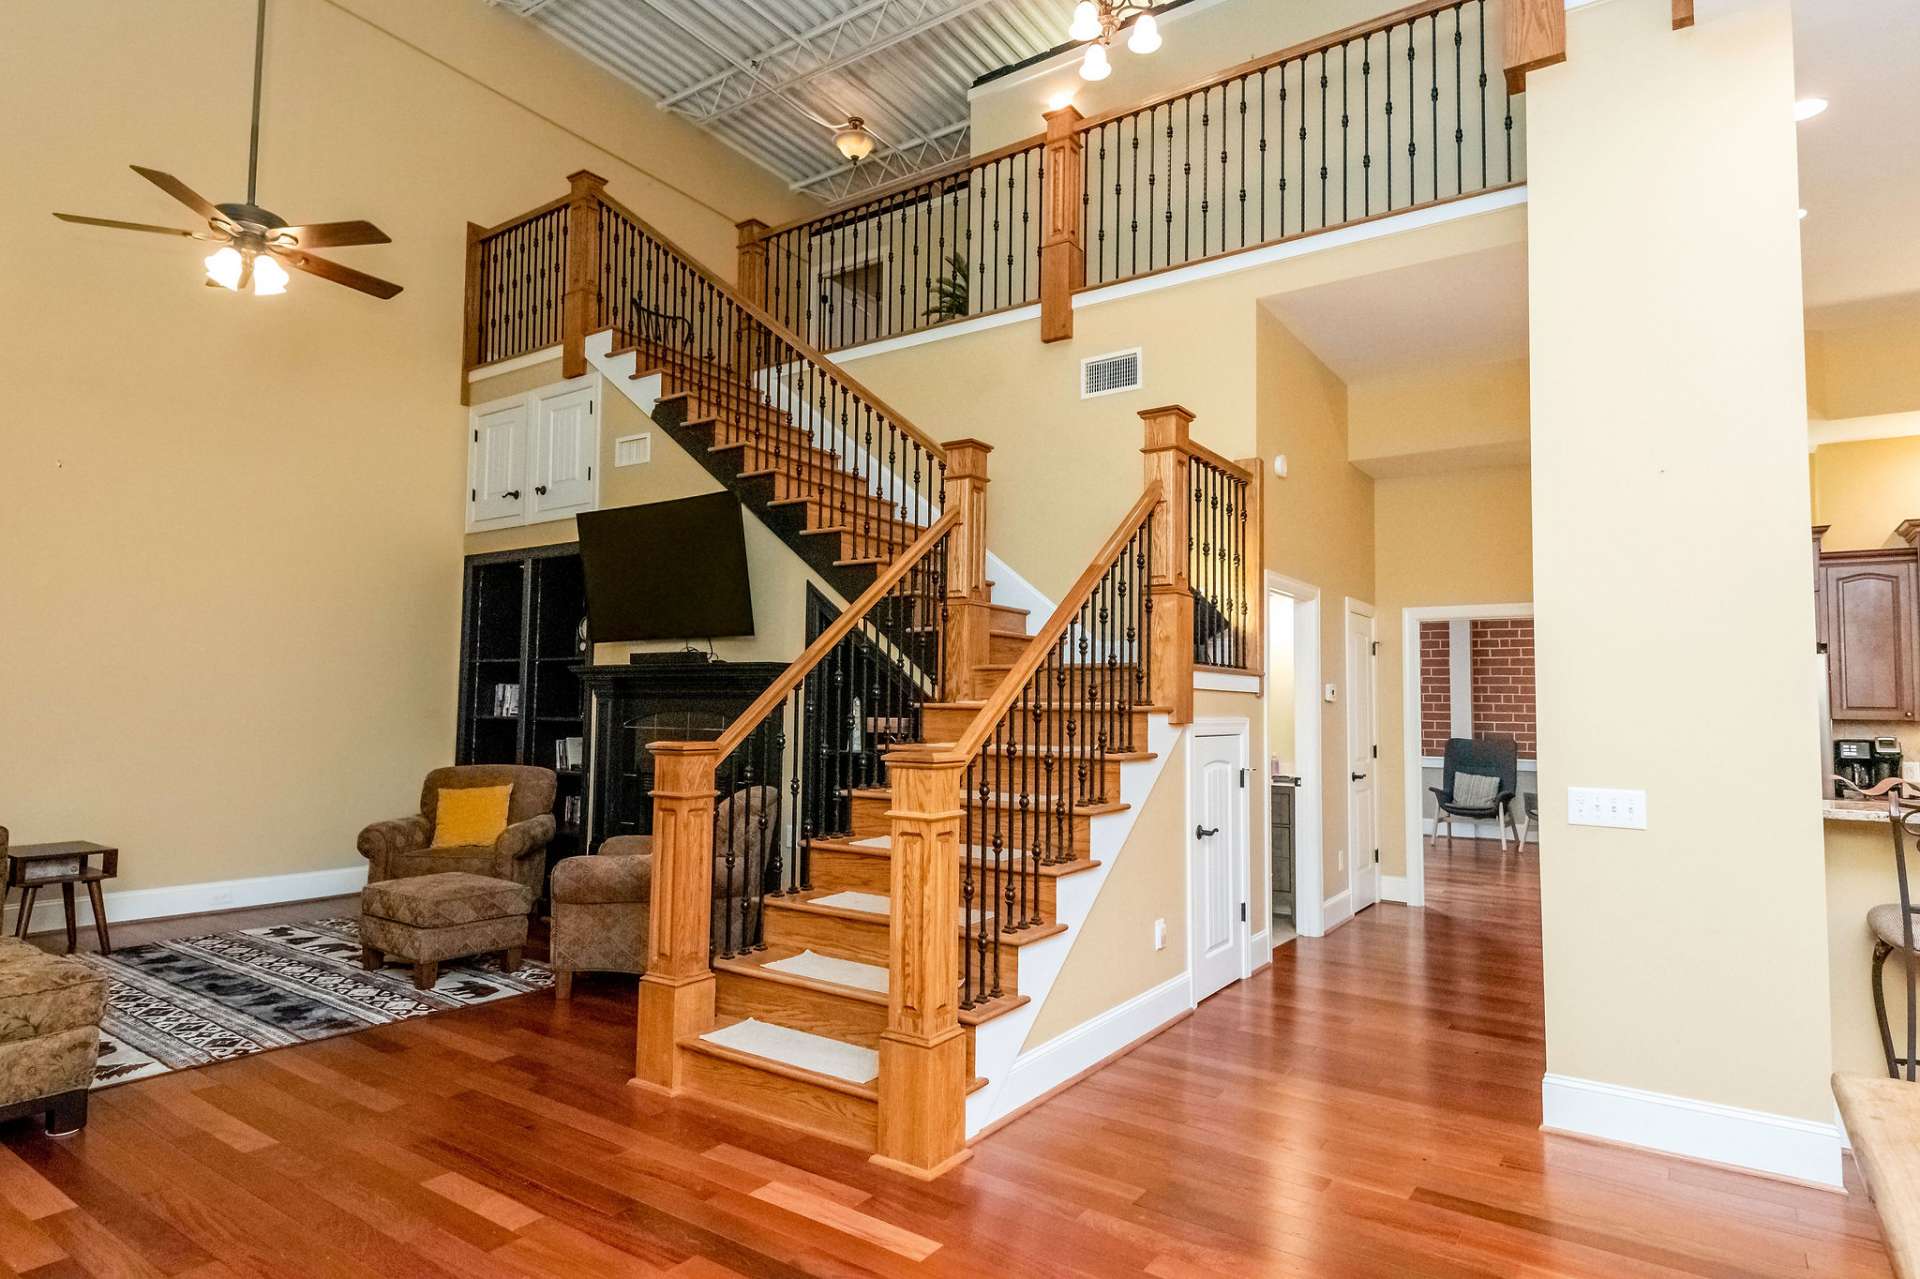 This grand staircase takes you to the spacious upper level. All rooms flow together with Brazilian cherry hardwood flooring and soaring ceilings.